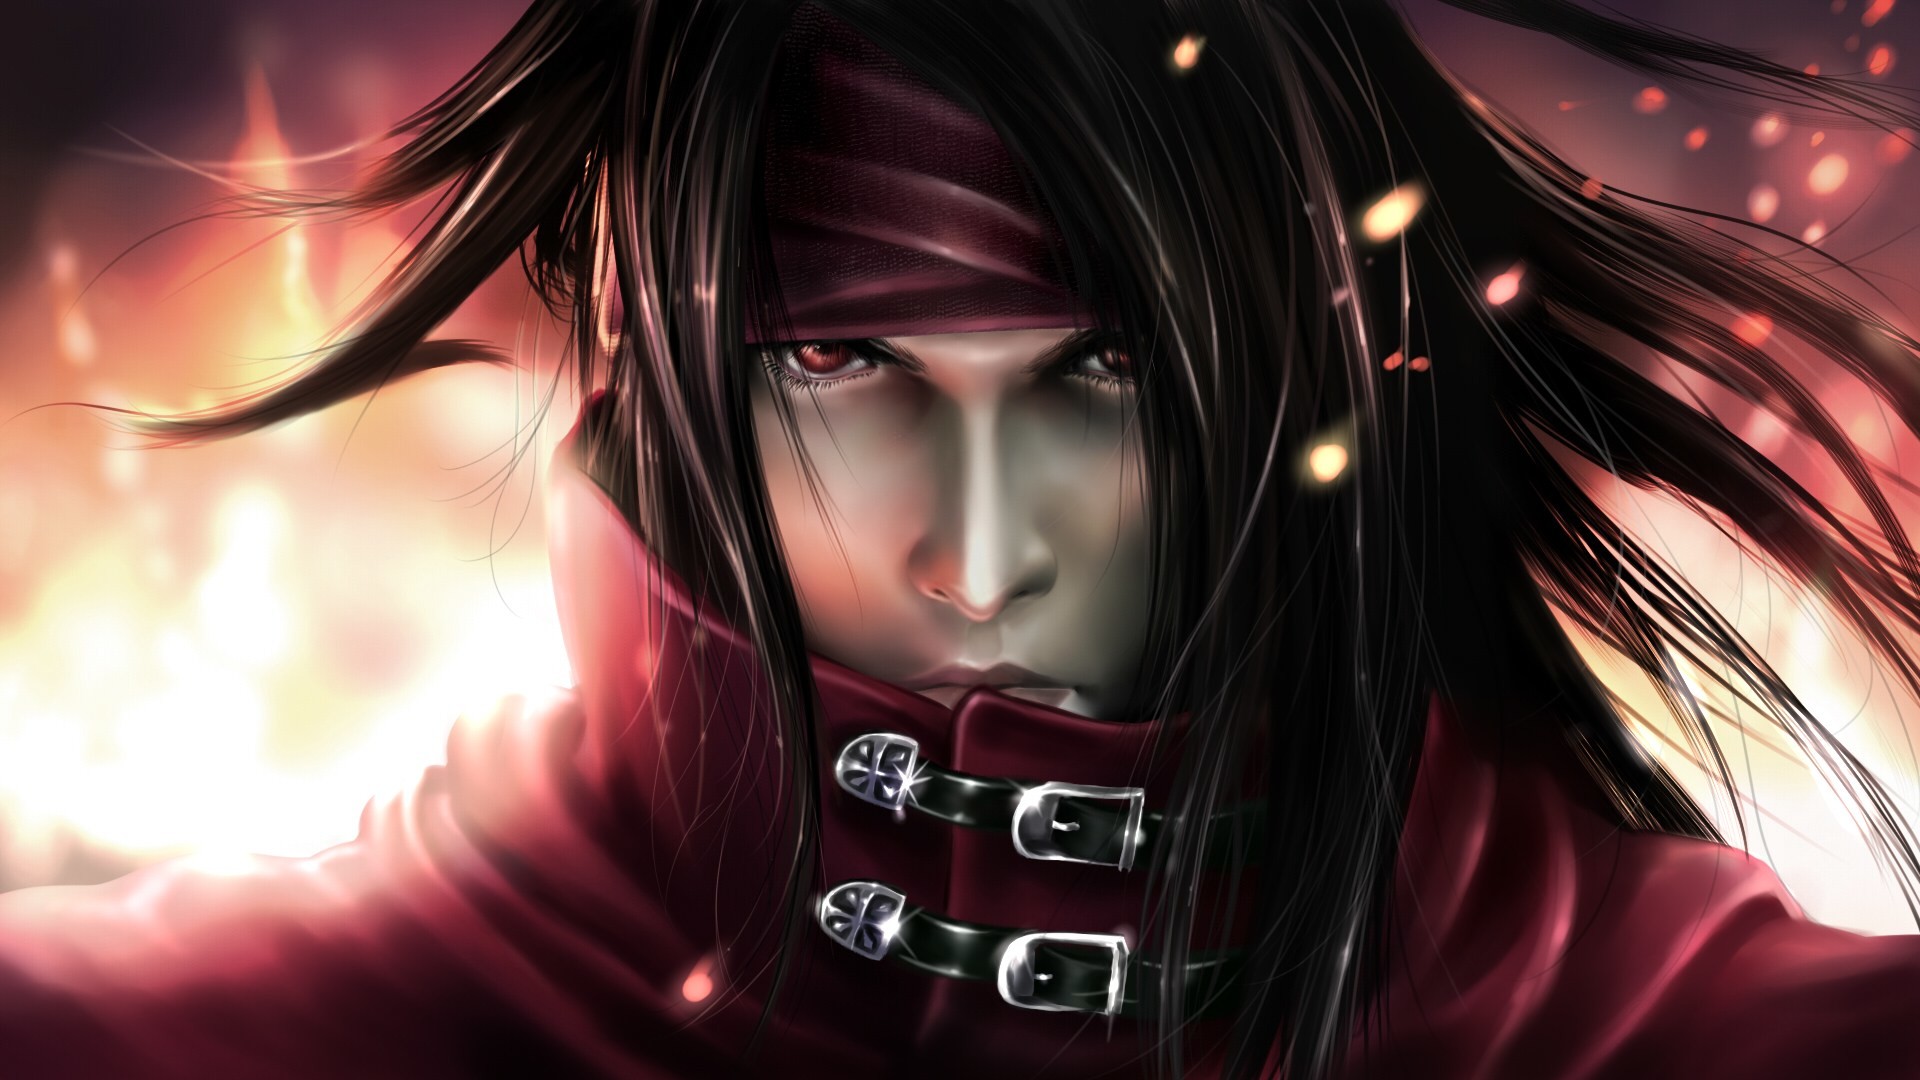 1920x1080 final fantasy vii images ff7 fan art hd wallpaper and background